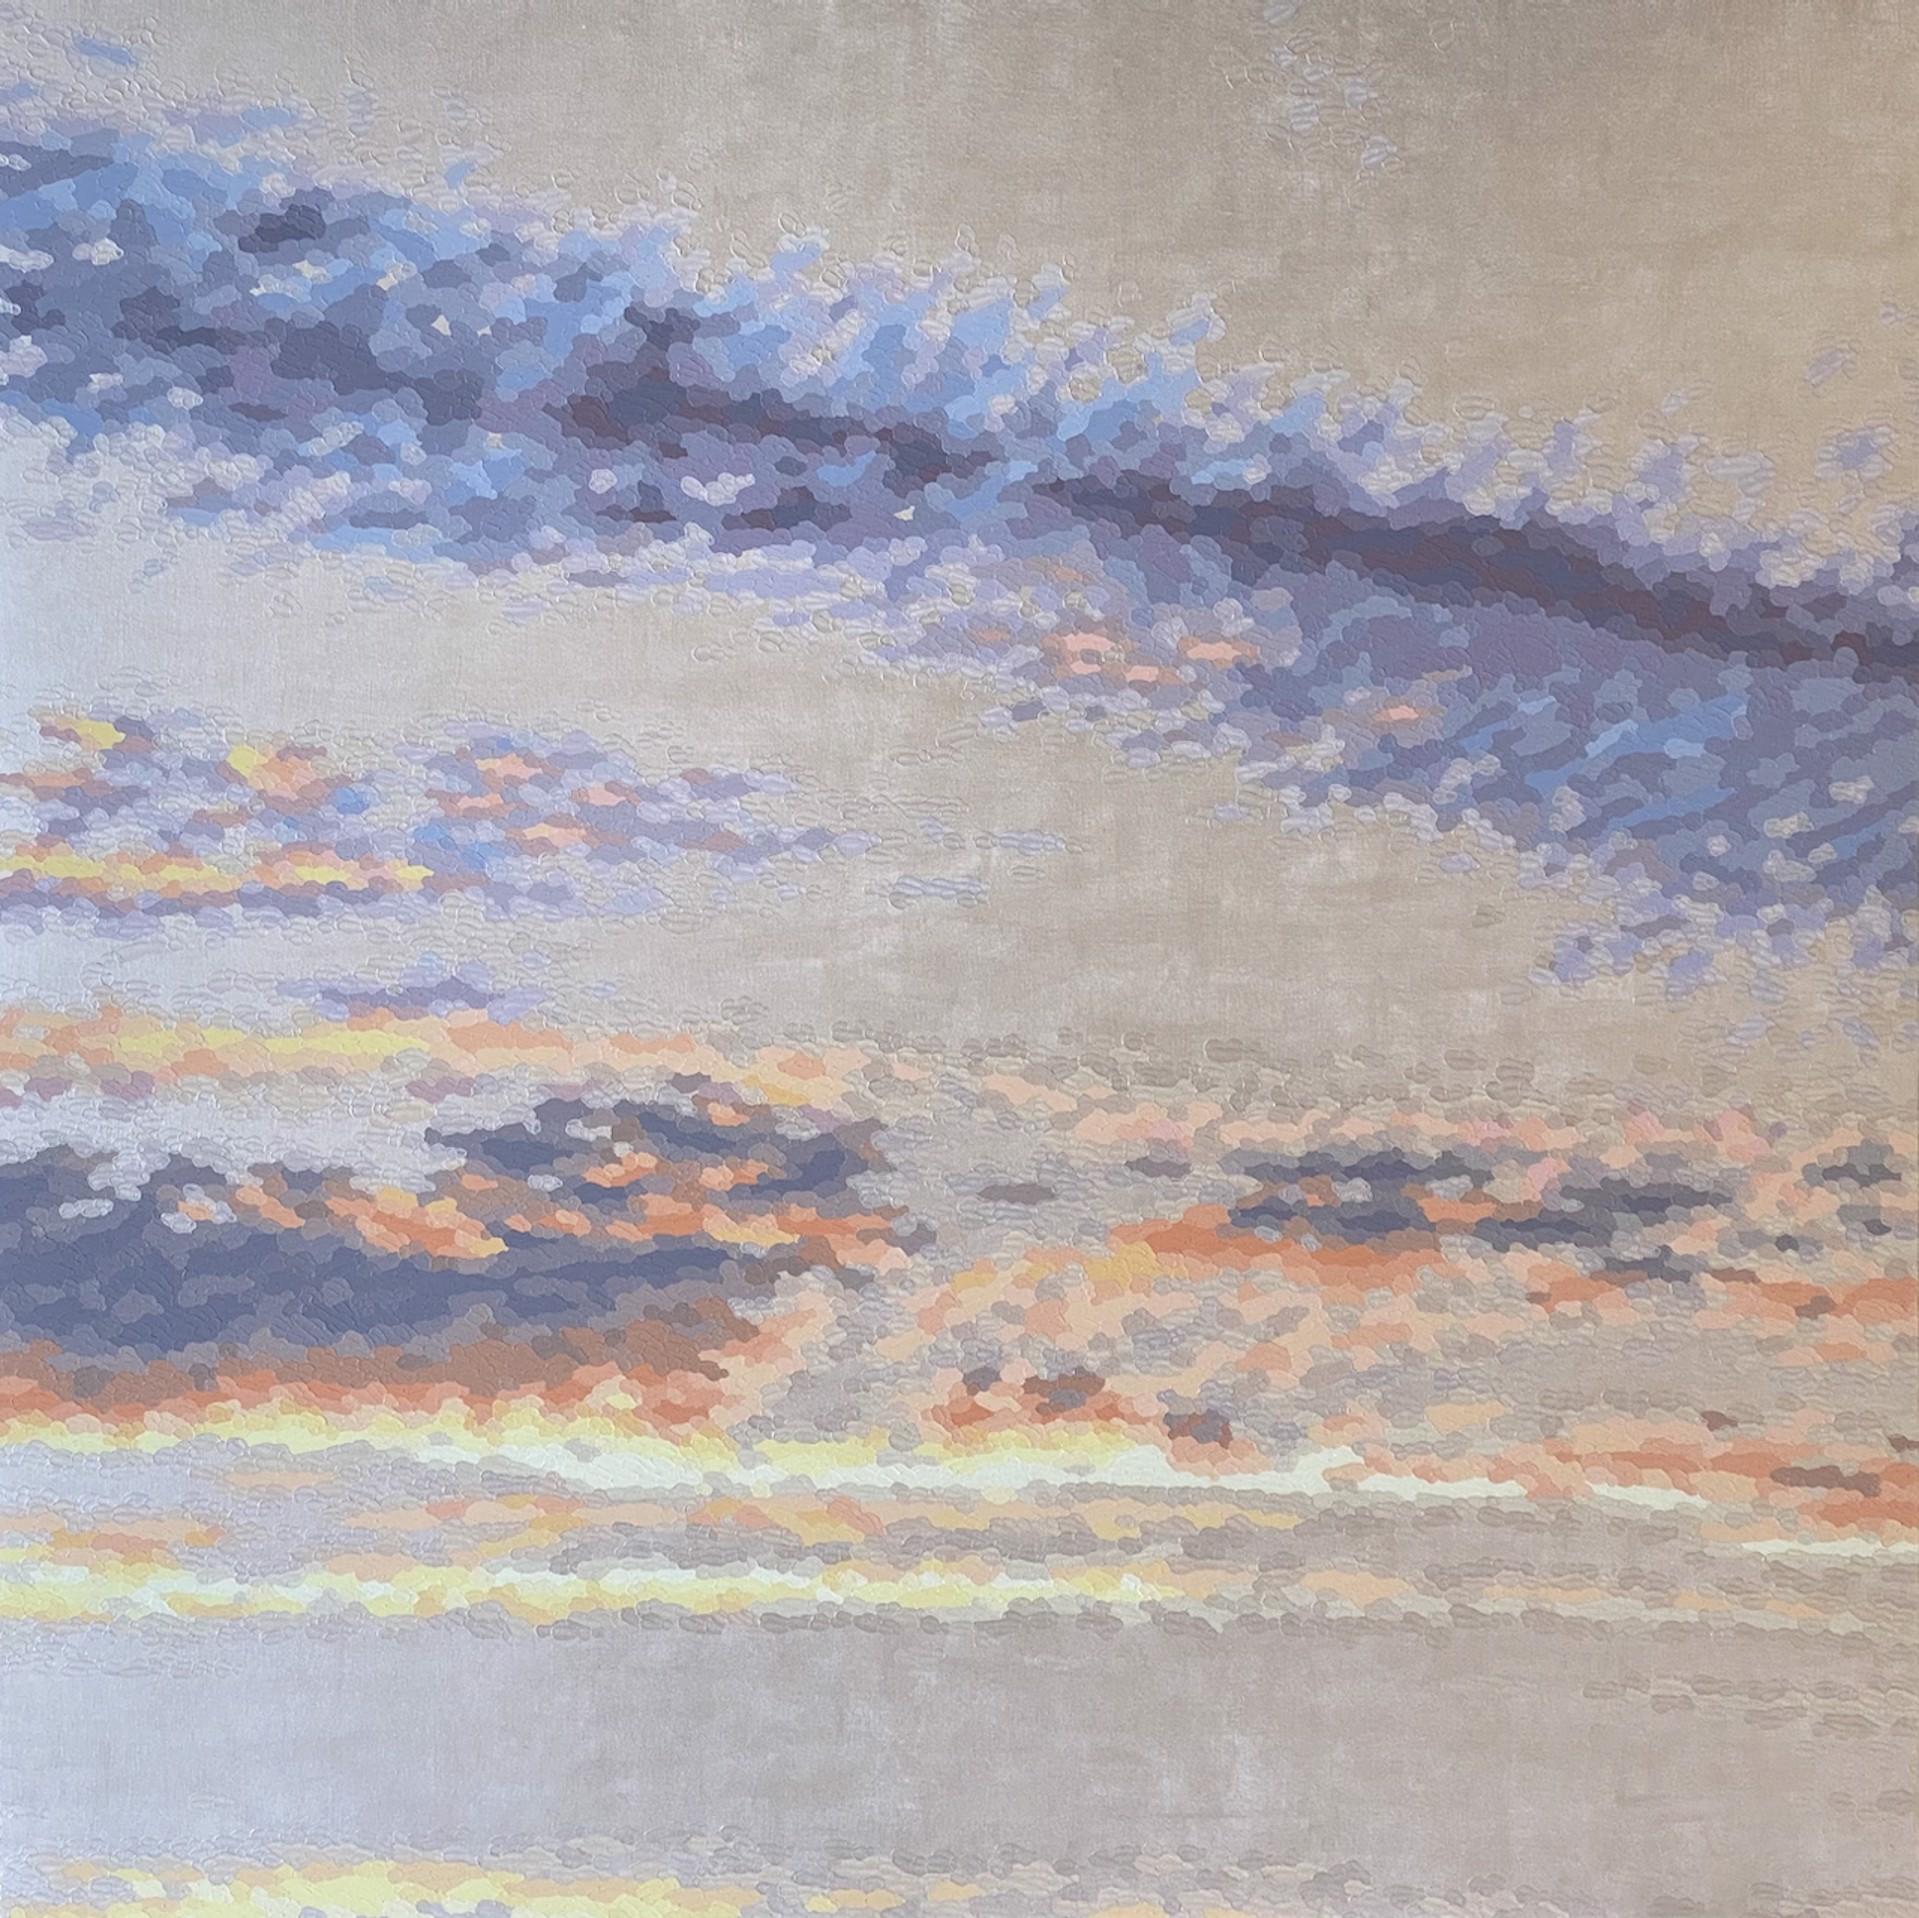 Into a Sorbet Sky by Elaine Coombs